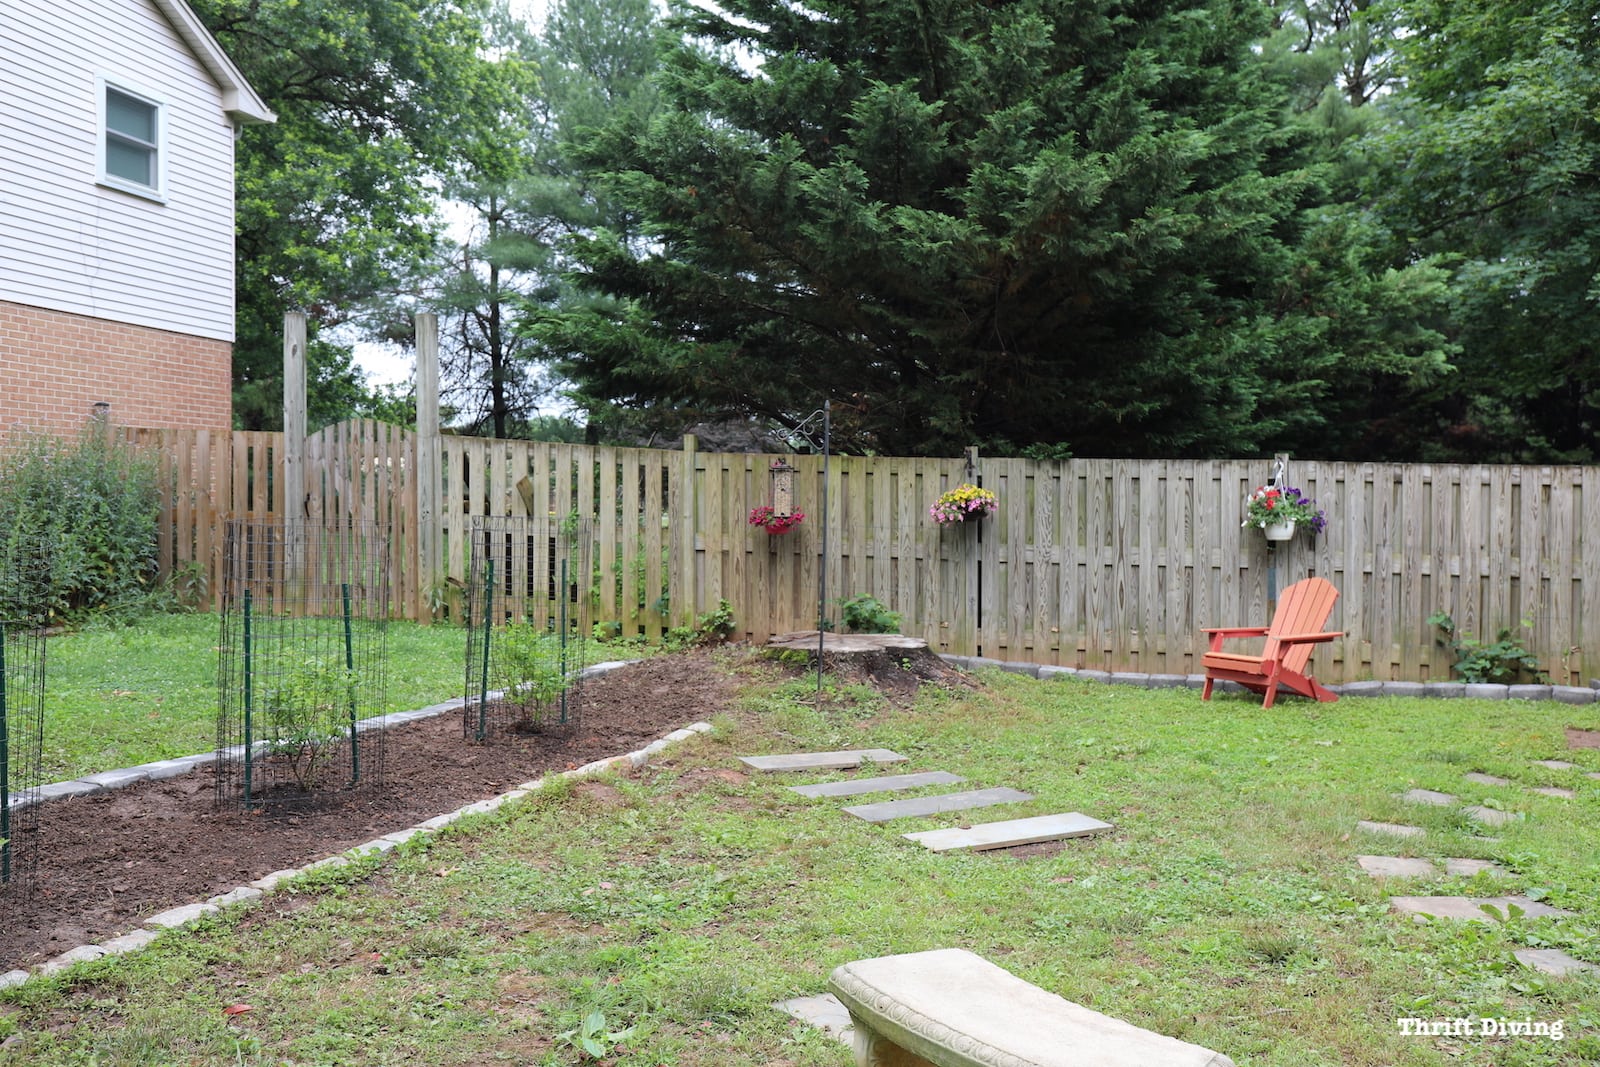 When planting blueberry bushes, find a full sun space in your yard to turn into a blueberry garden. Add some pops of color, a chair, bird feeder, and turn the area into a relaxing garden spot. 